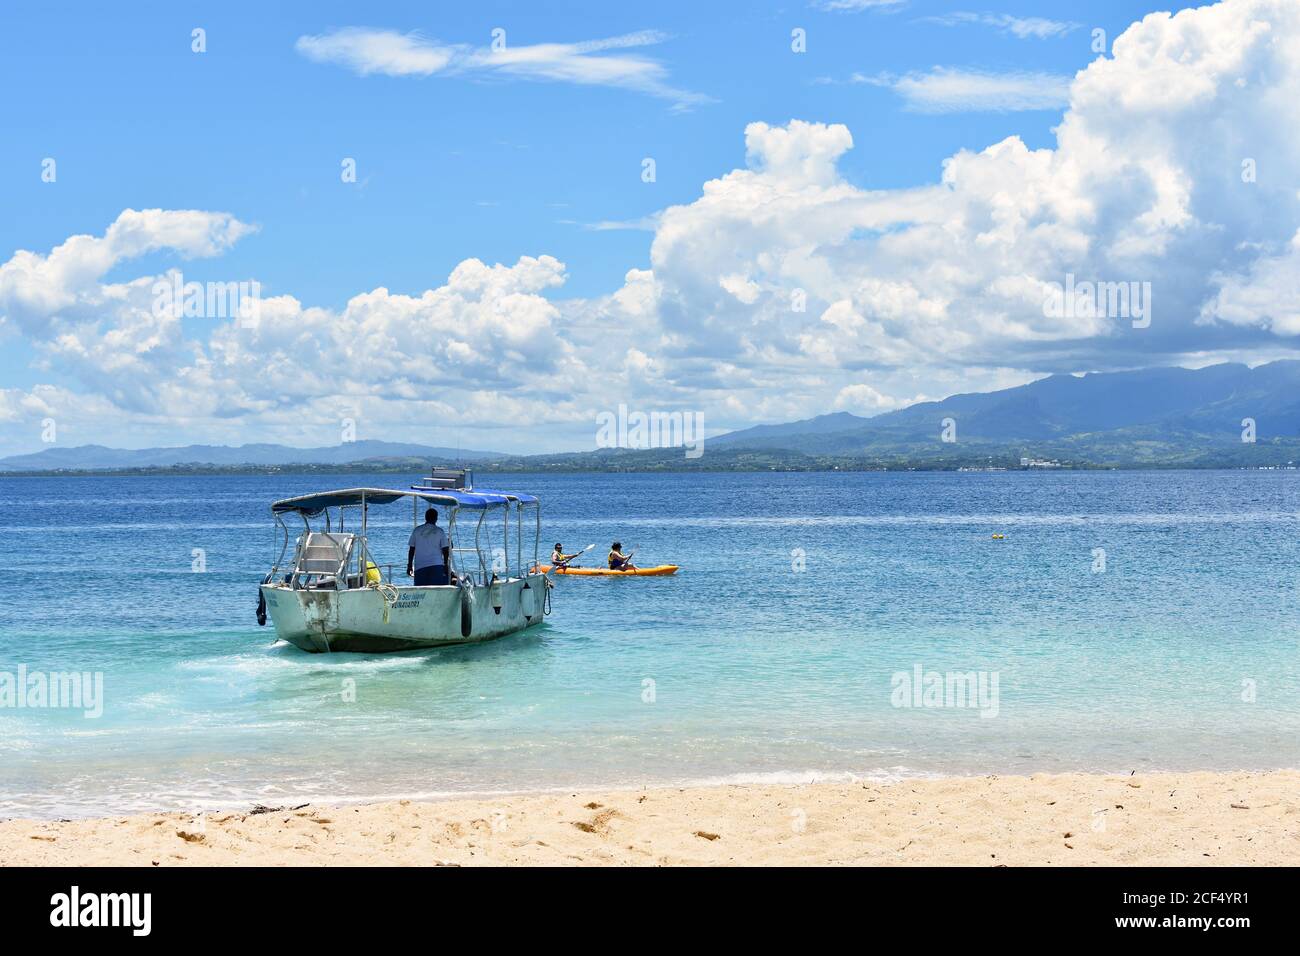 Two Kayakers pass by a small boat  in the waters around South Sea Island, part of the Mamanuca Islands in Fiji.   Golden sands and blue calm sea. Stock Photo